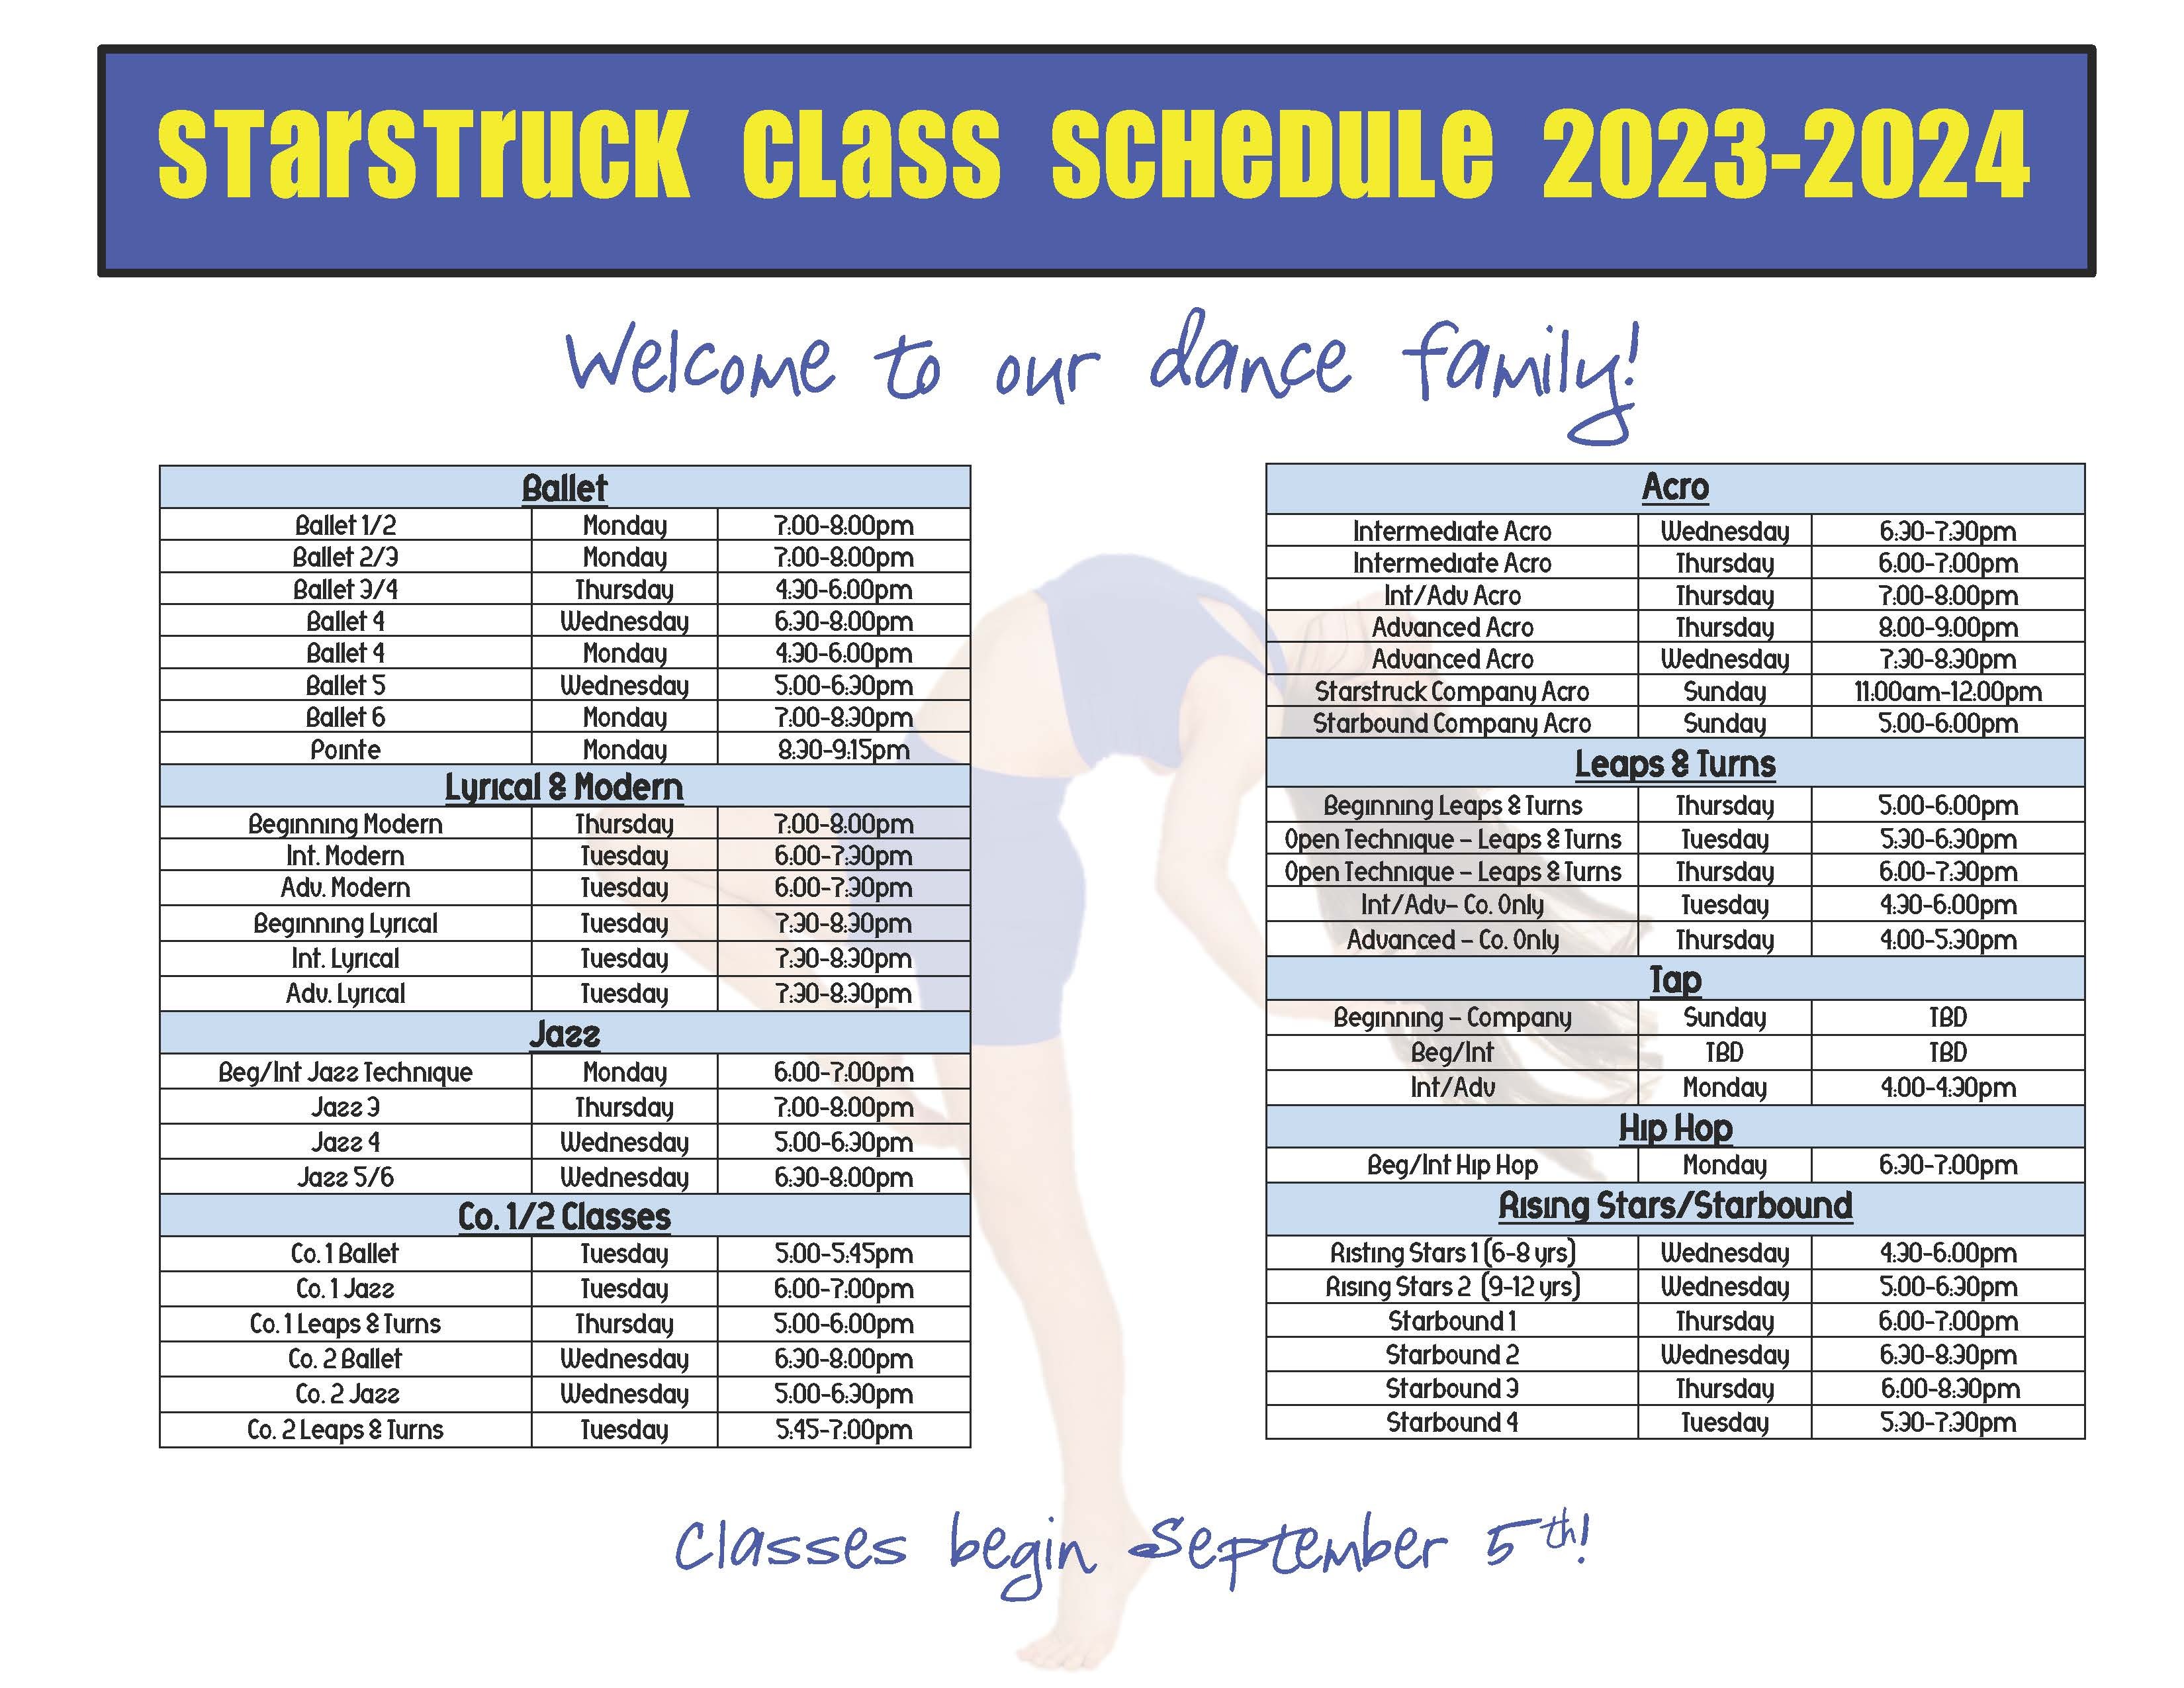 Starstruck Performing Arts Academy group Fall Schedule Page 1 Info